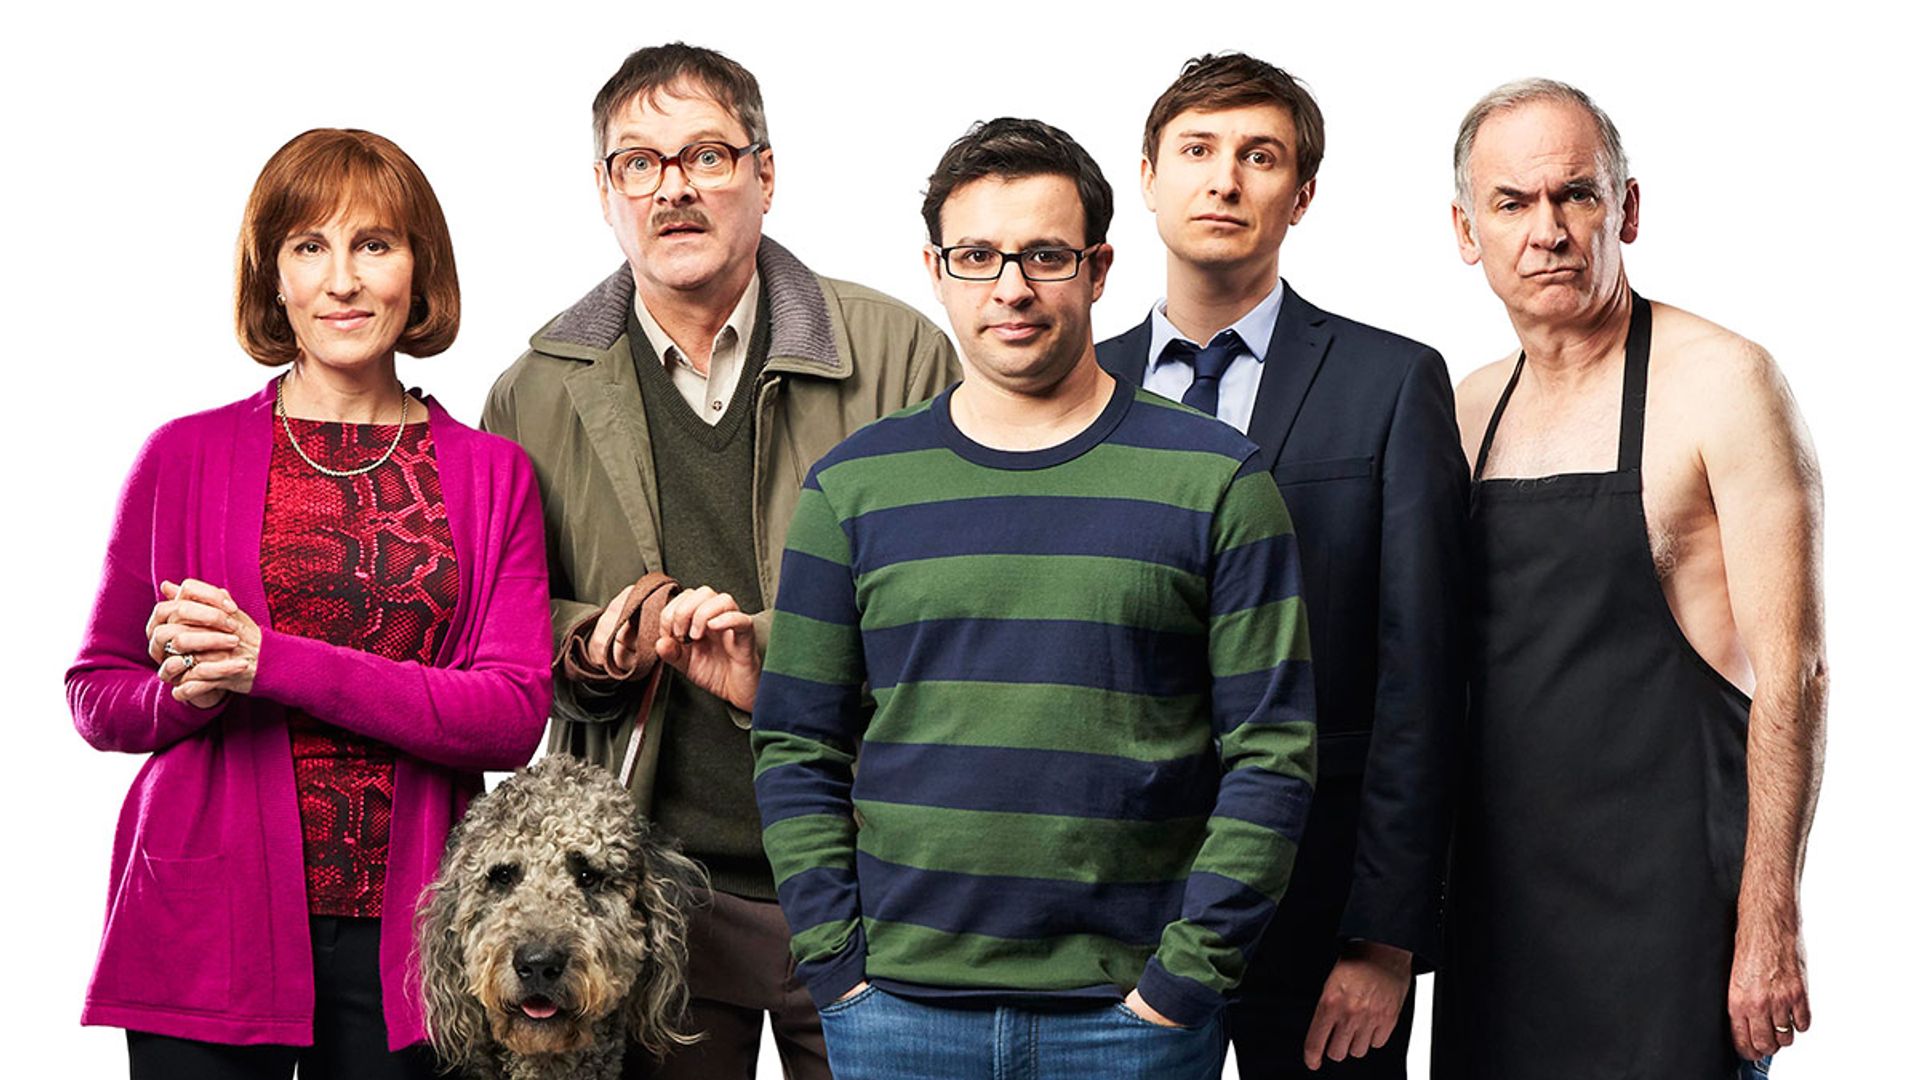 Best British comedy TV show: Netflix: Is Friday Night Dinner season 7 happening? Find out details |  HELLO!